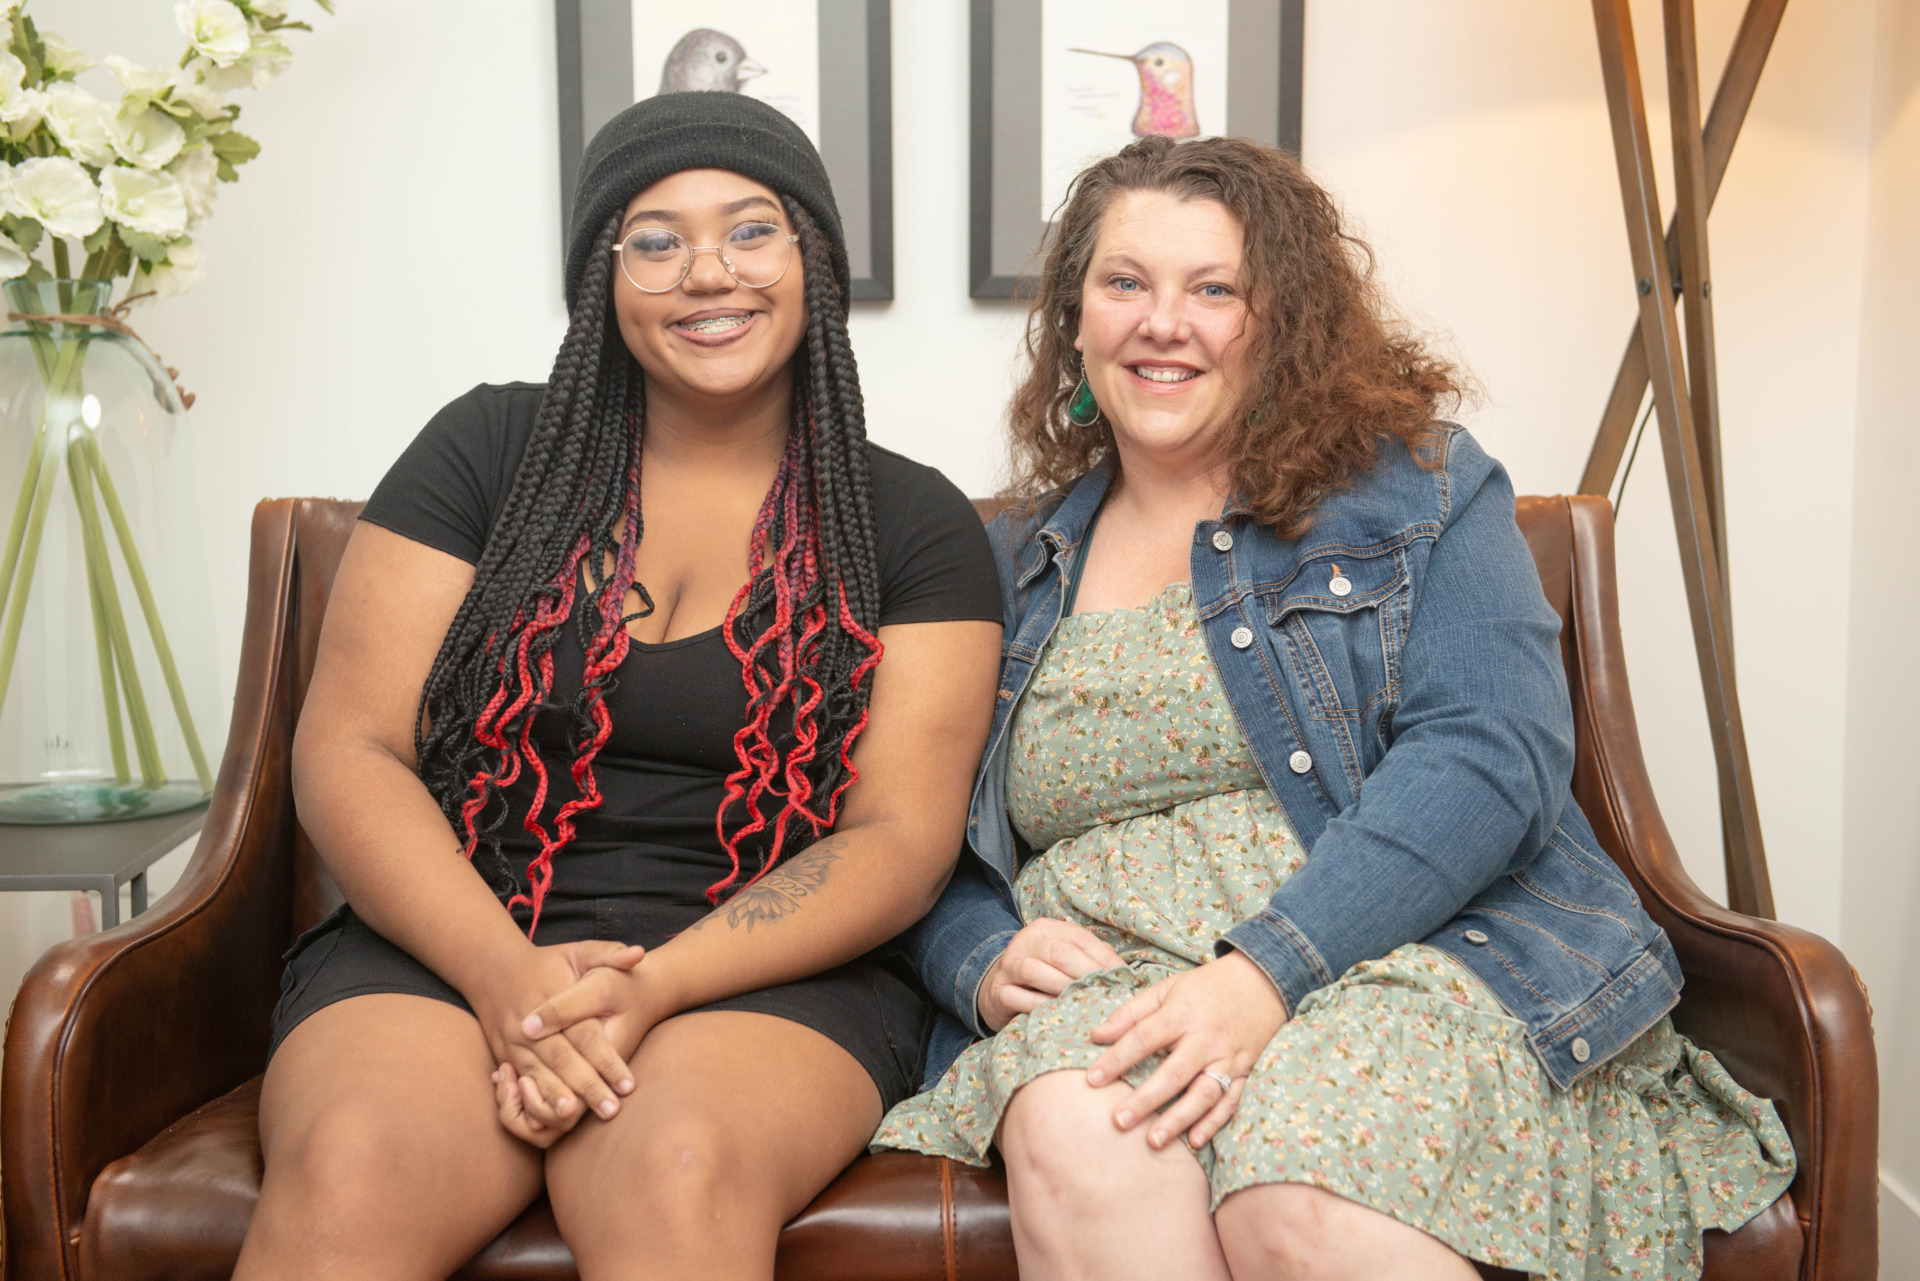 Adoptive mother and daughter of different races sit on a couch smiling